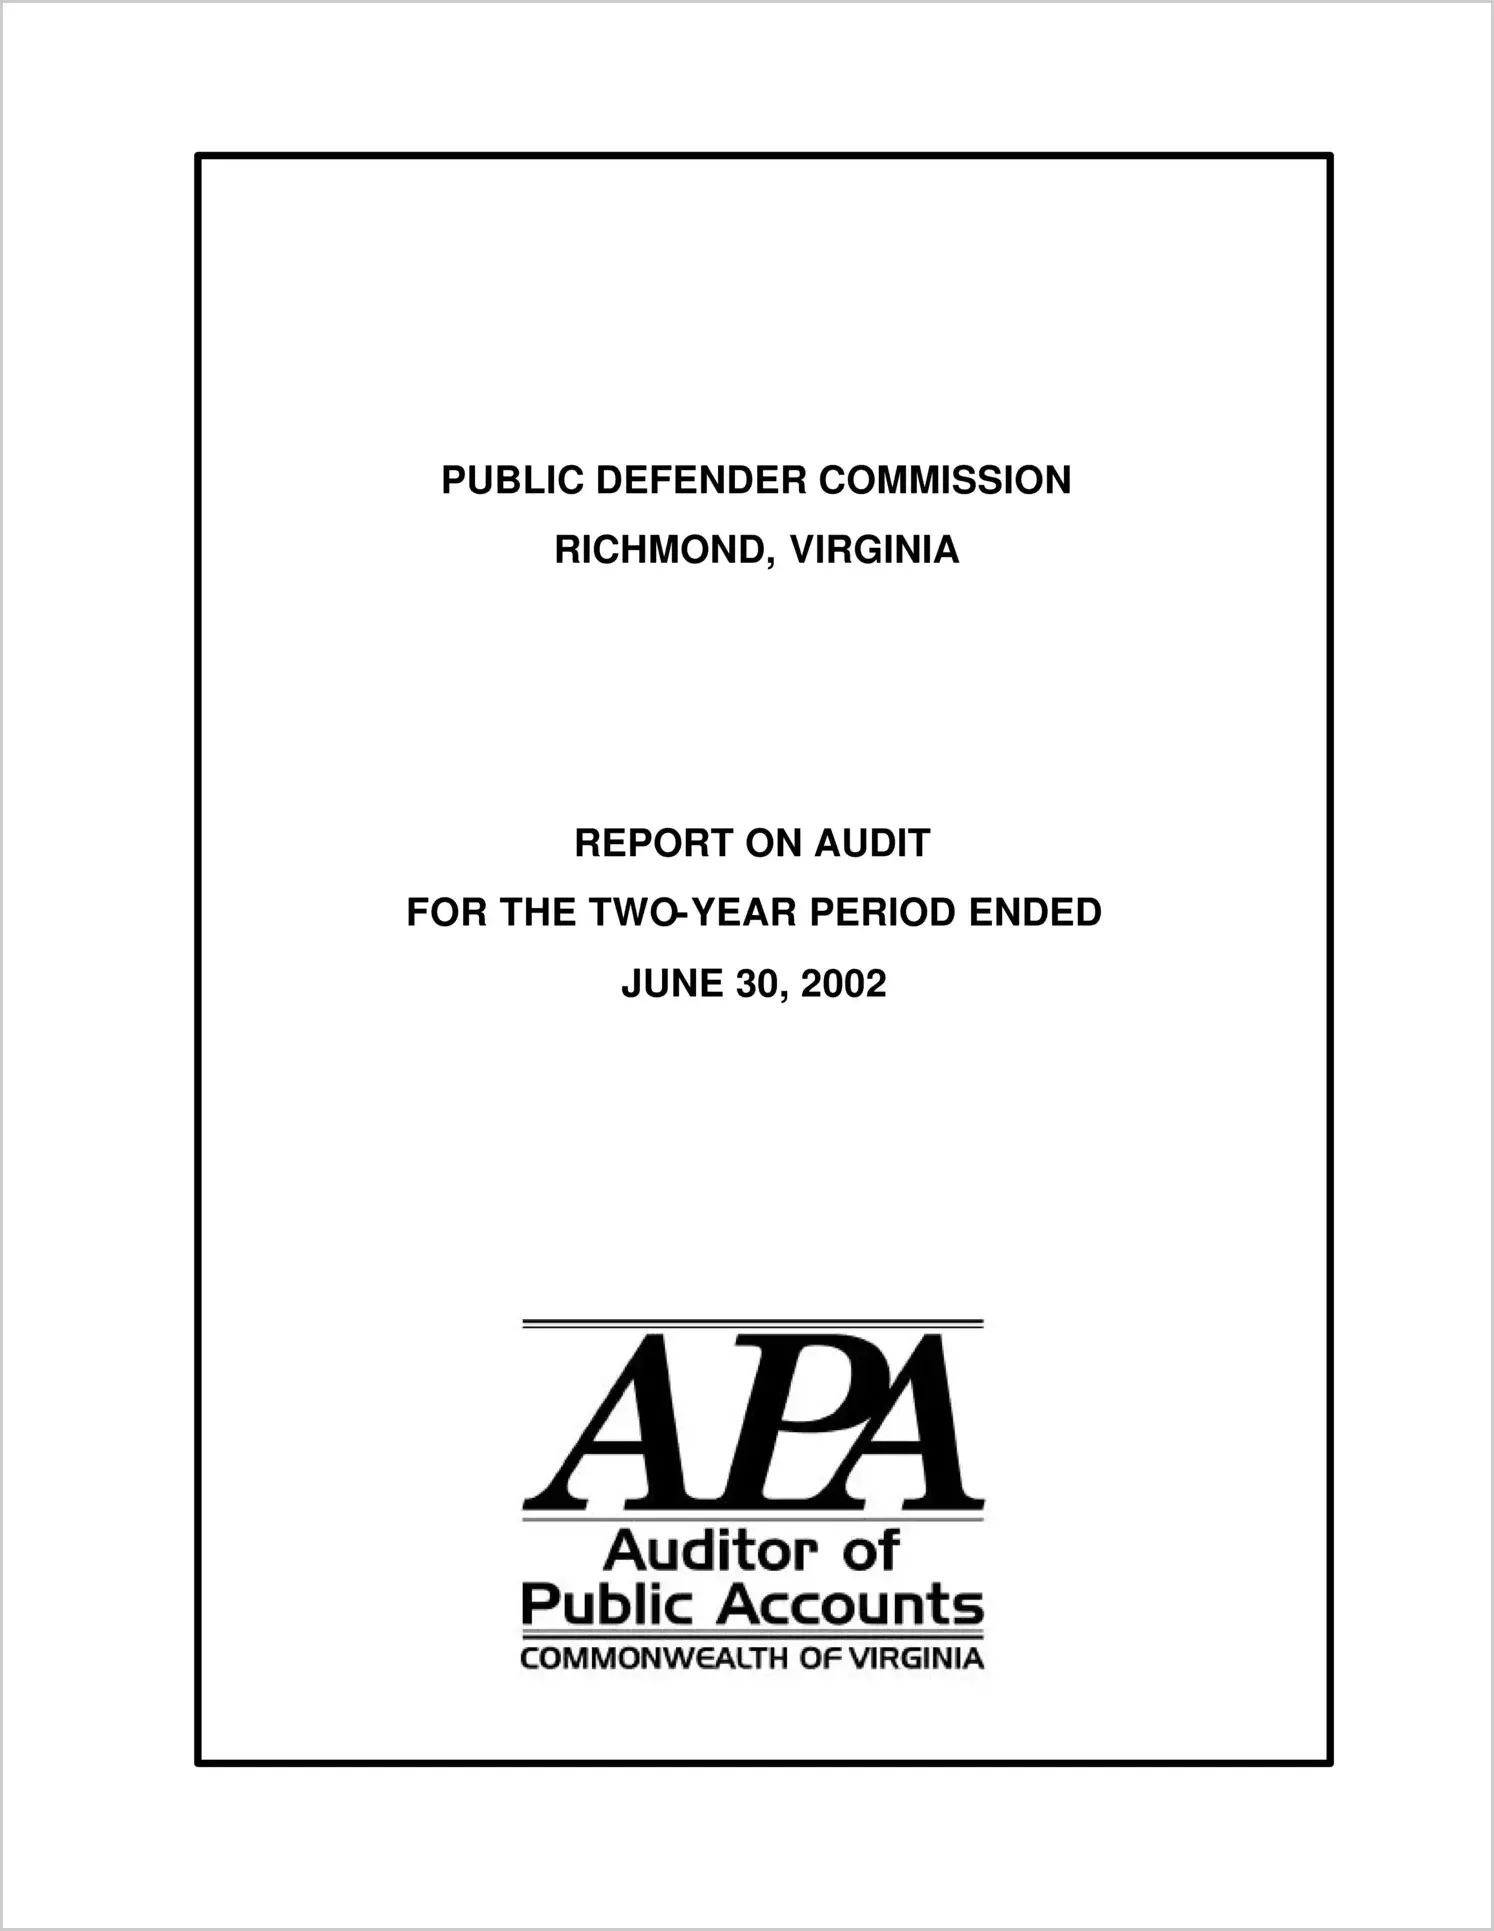 Public Defender Commission for the two-year period ended June 30, 2002